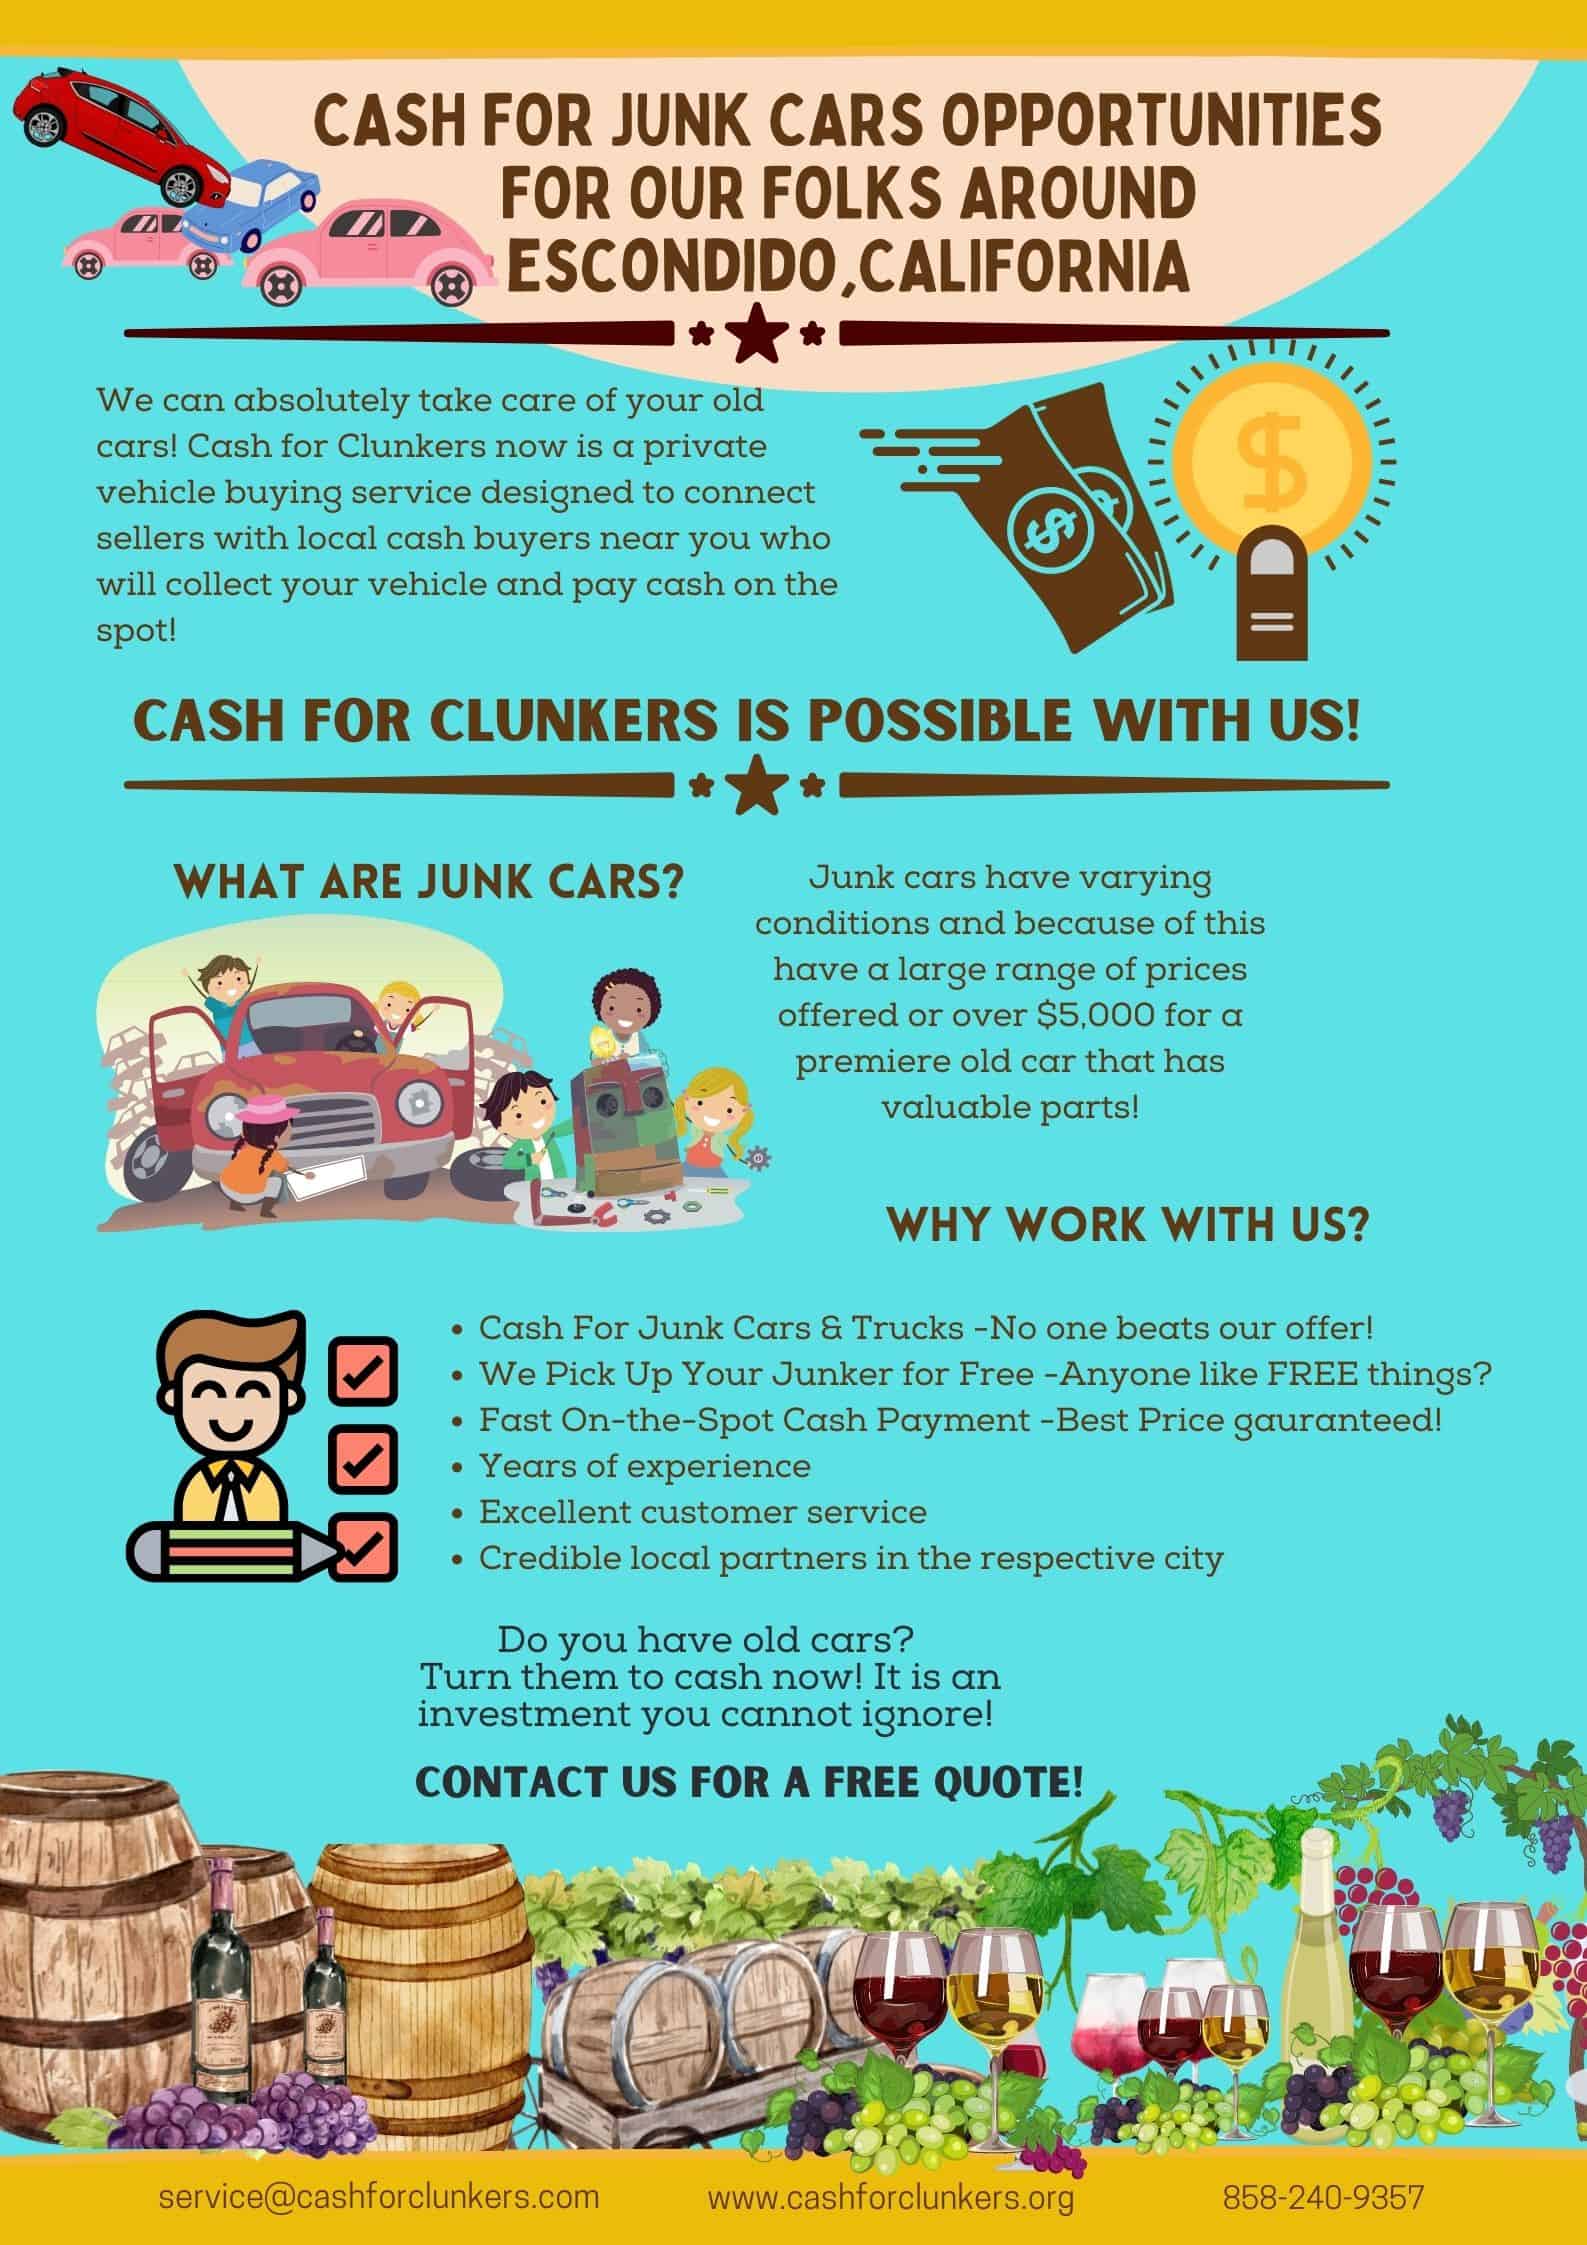 We offer cash for clunkers in Escondido, California!